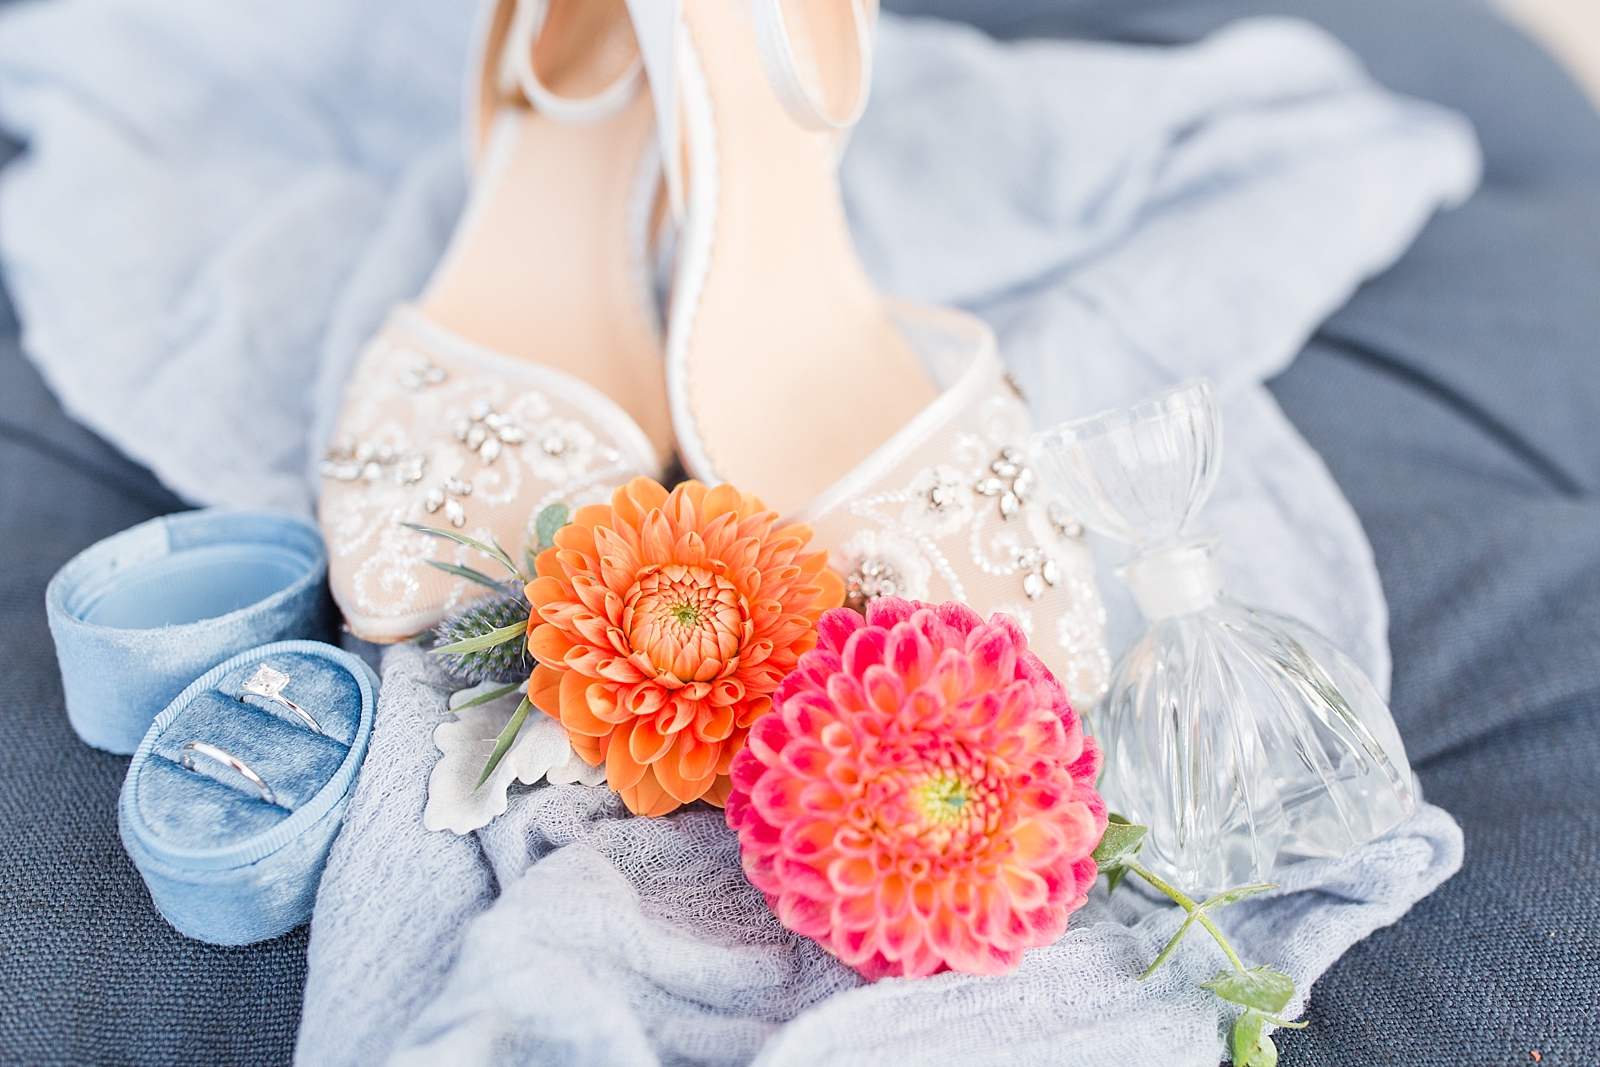 Chestnut Ridge Wedding bridal shoes rings and orange and pink flowers on blue ottoman Photo